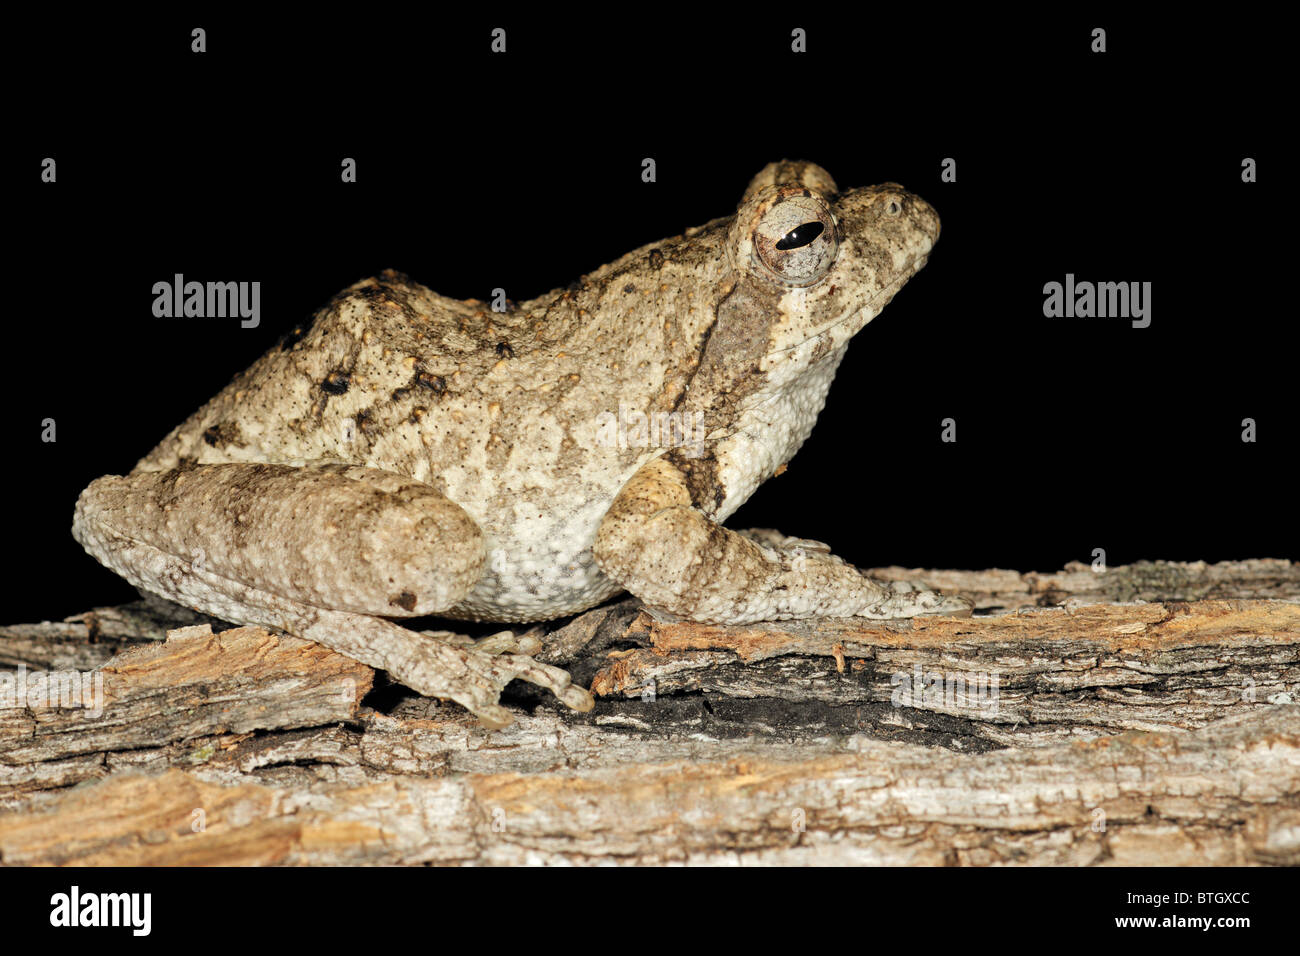 Foam nest frog (Chiromantis xerampelina) camouflaged on the bark of a tree, South Africa Stock Photo